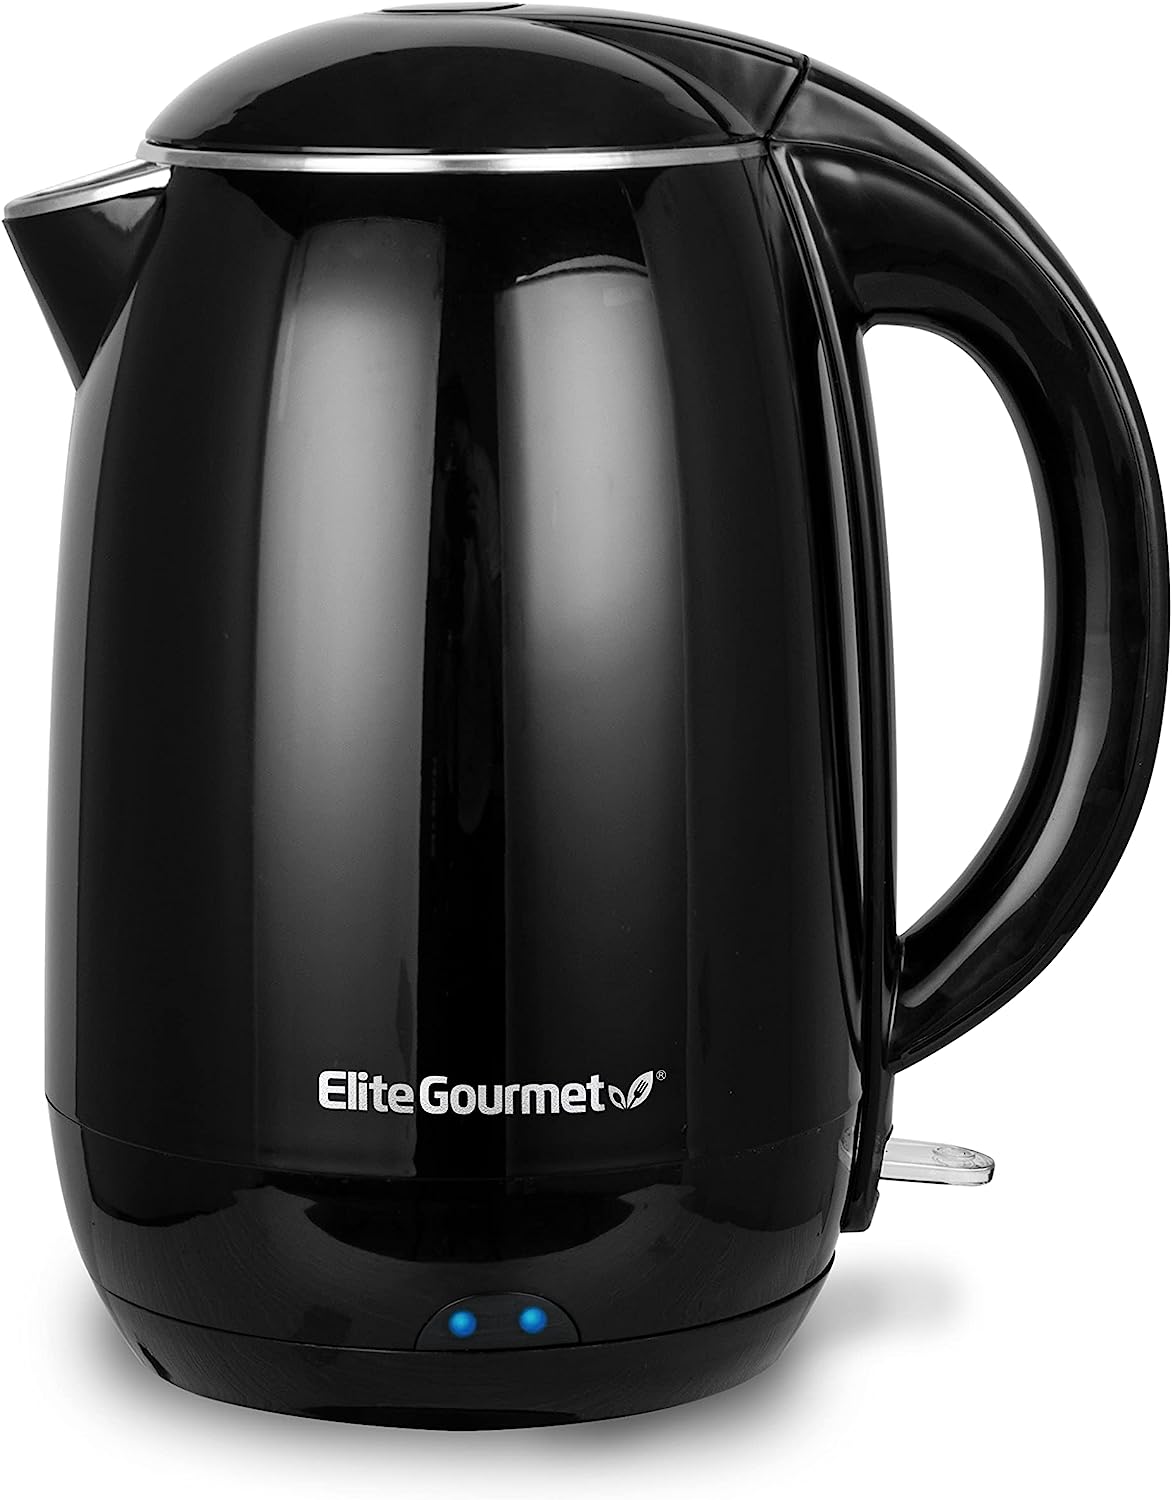 COMFEE' Stainless Steel Cordless Electric Kettle. 1500W Fast Boil with LED  Light, Auto Shut-Off and Boil-Dry Protection. 1.7 Liter 1.7 Liter stainless  steel with window 